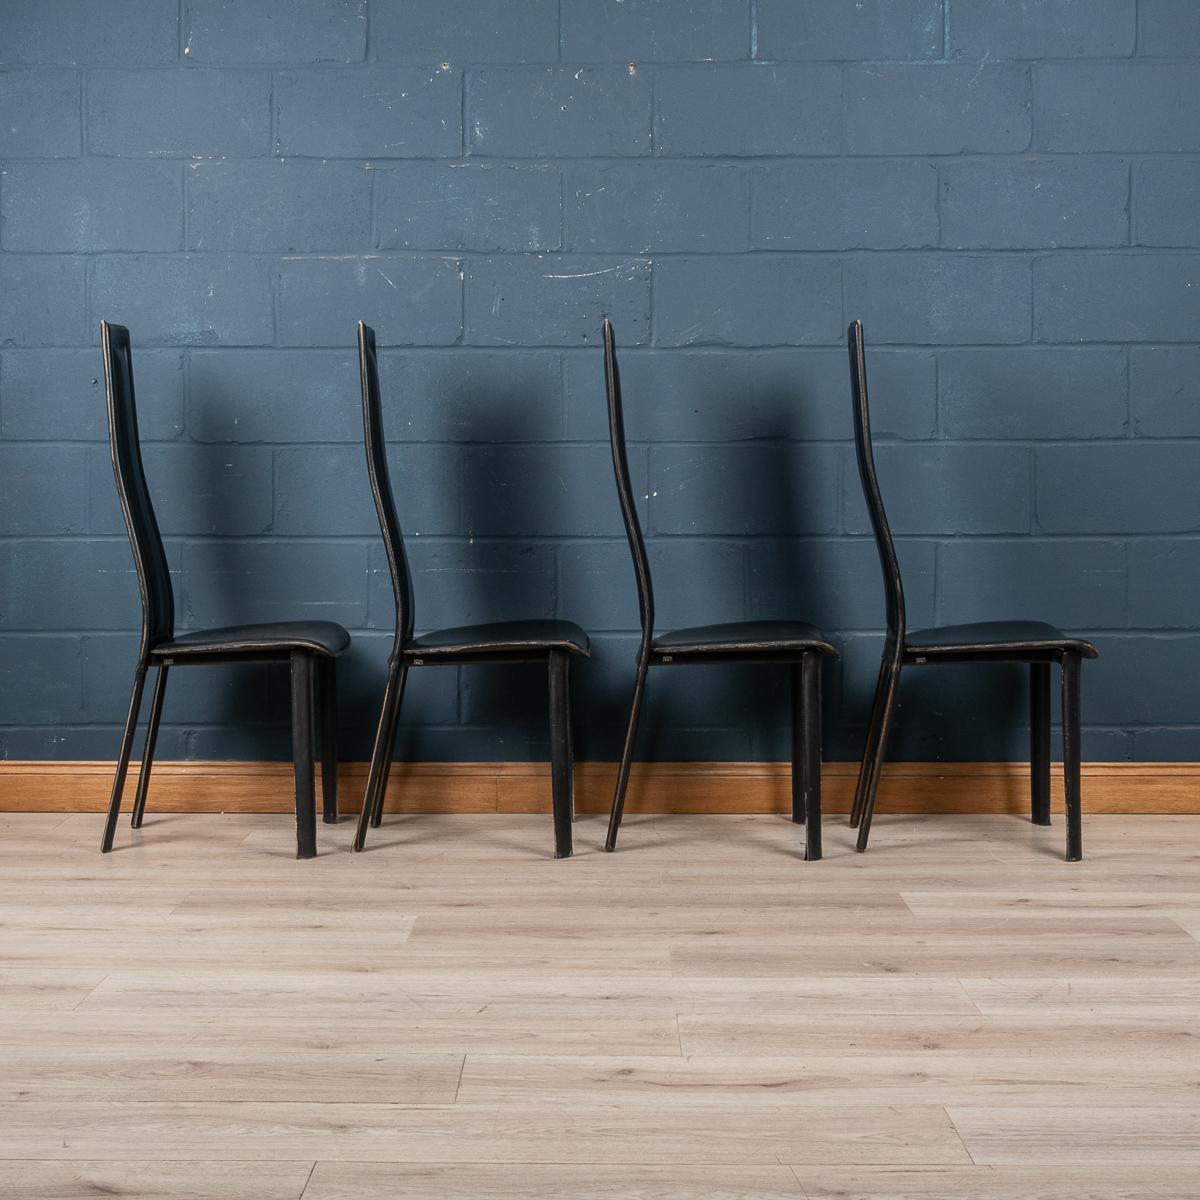 20th Century Italian Set Of Four Dining Chairs By Giorgio Cattelan For Emmepi For Sale 2